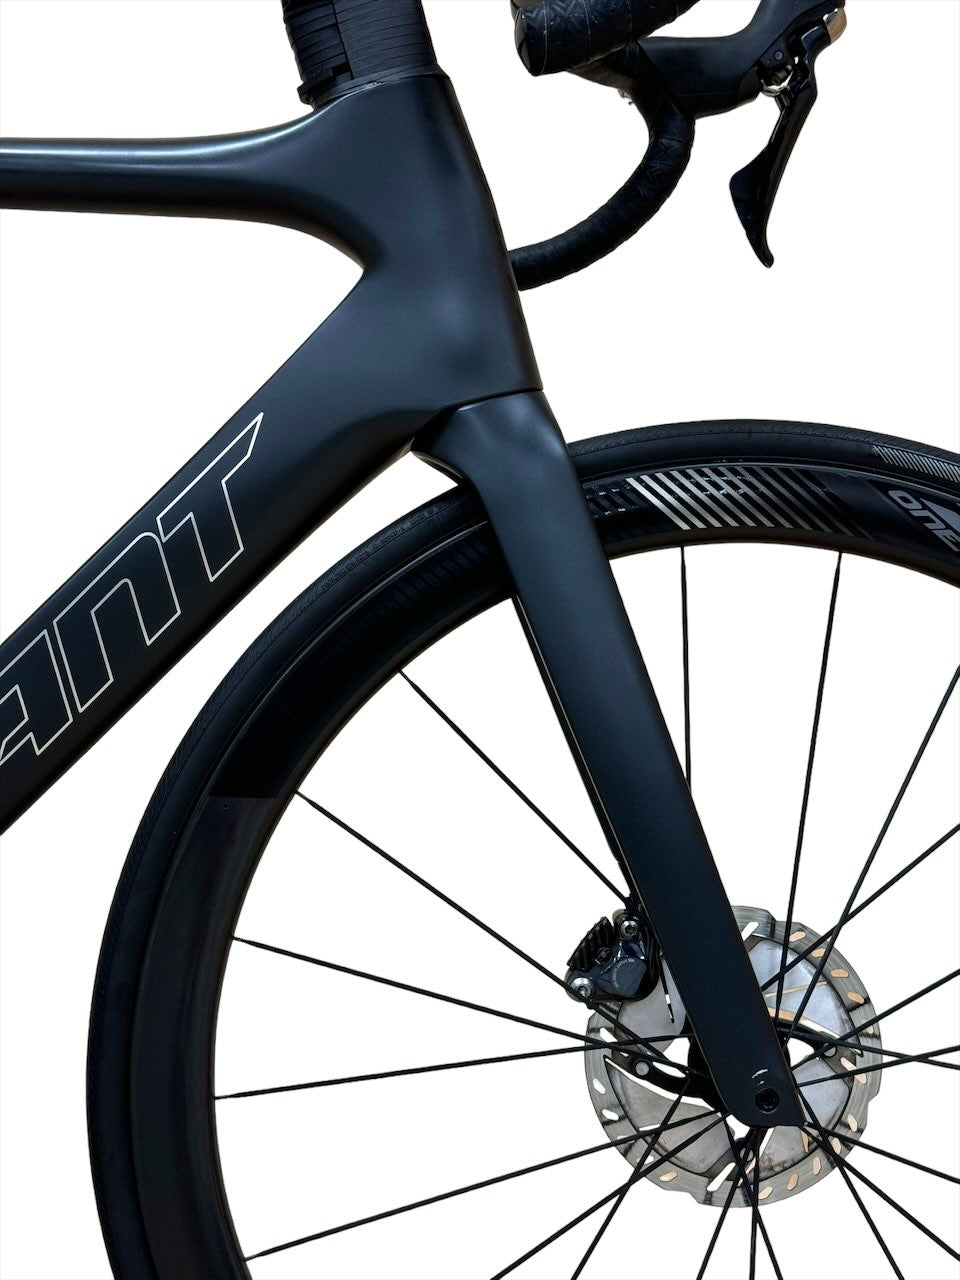 Giant Propel Advanced 1 28 inch Racefiets